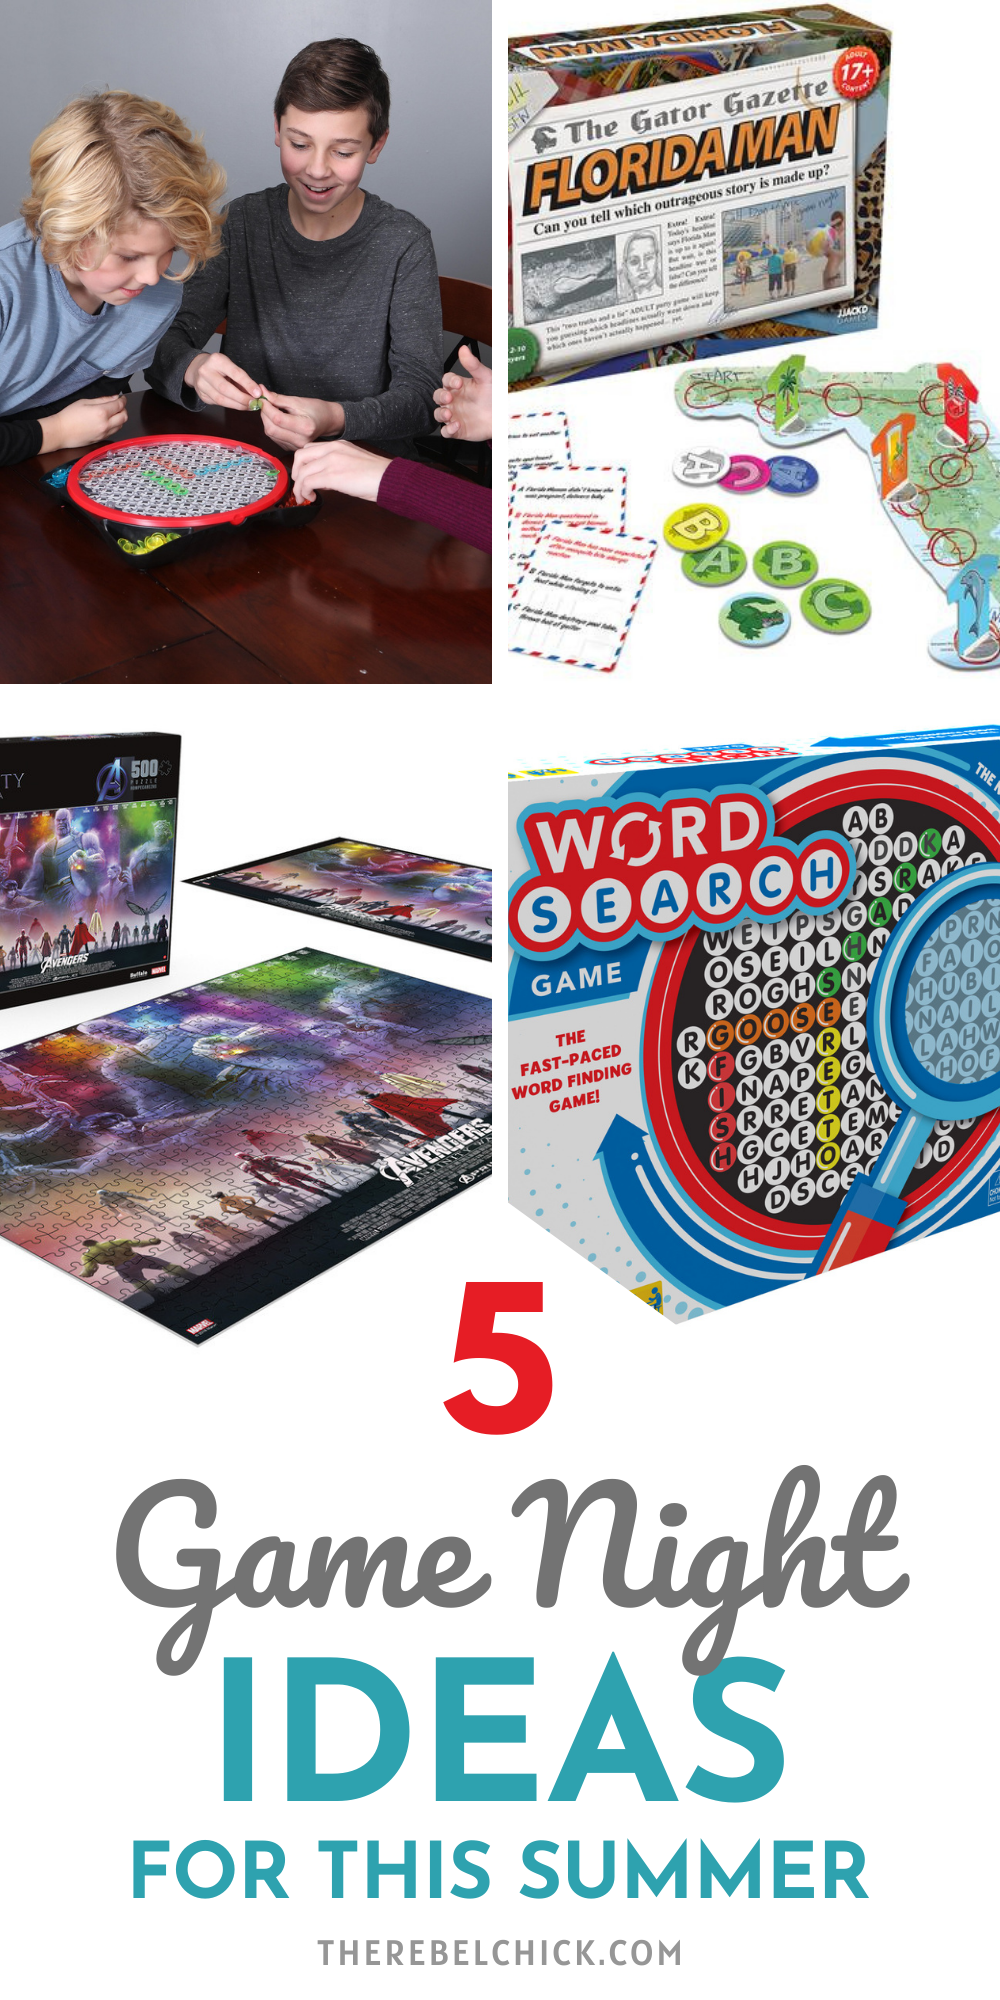 5 Ideas for Game Night this Summer